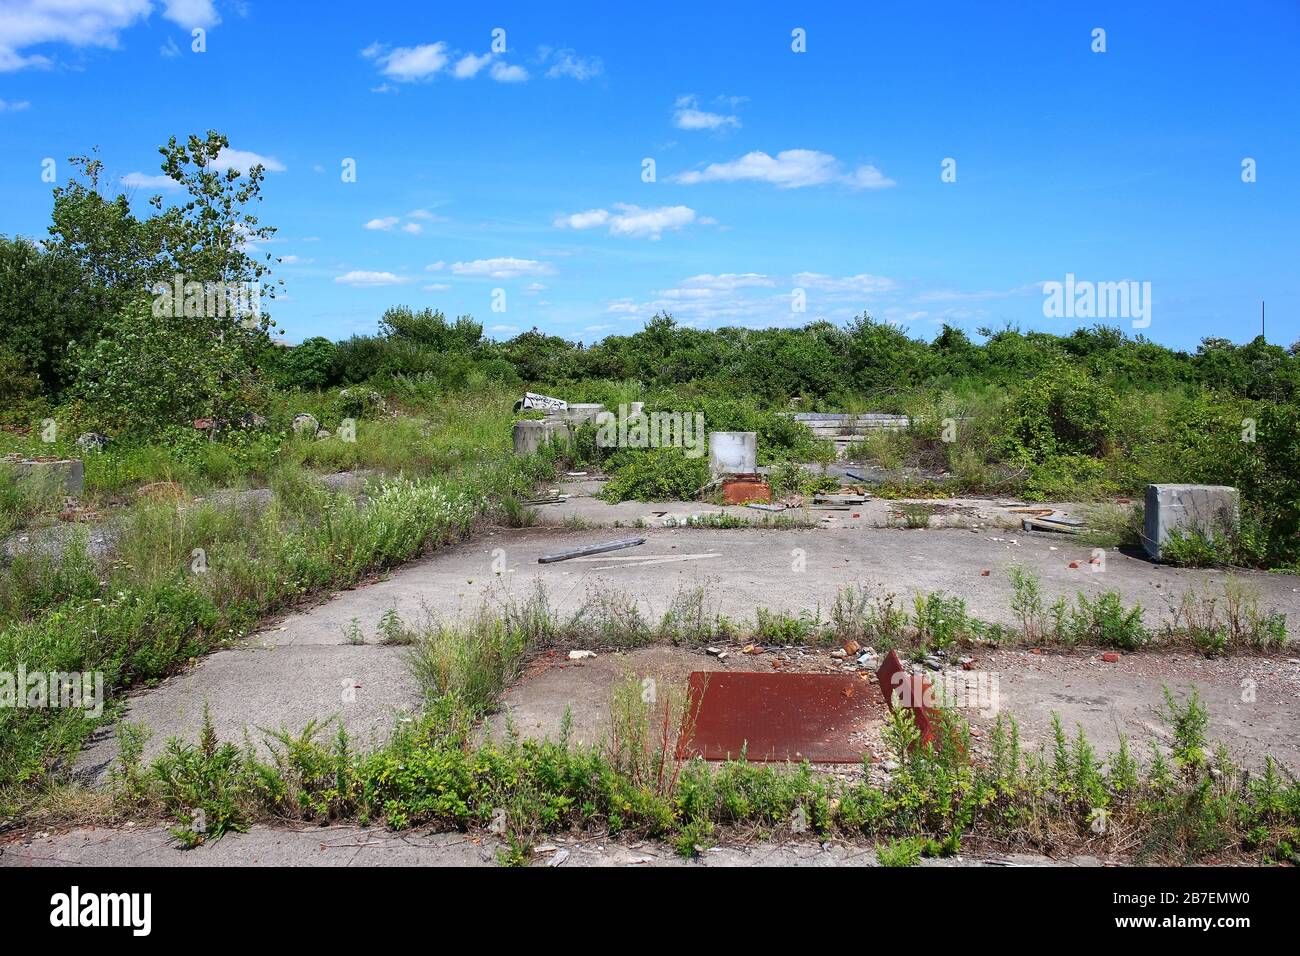 Nike Missile Launch Site NY-49 is an old abandoned military structure, which dates back to 1955, seen here on August 11th, 2019 in Queens, New York, U Stock Photo